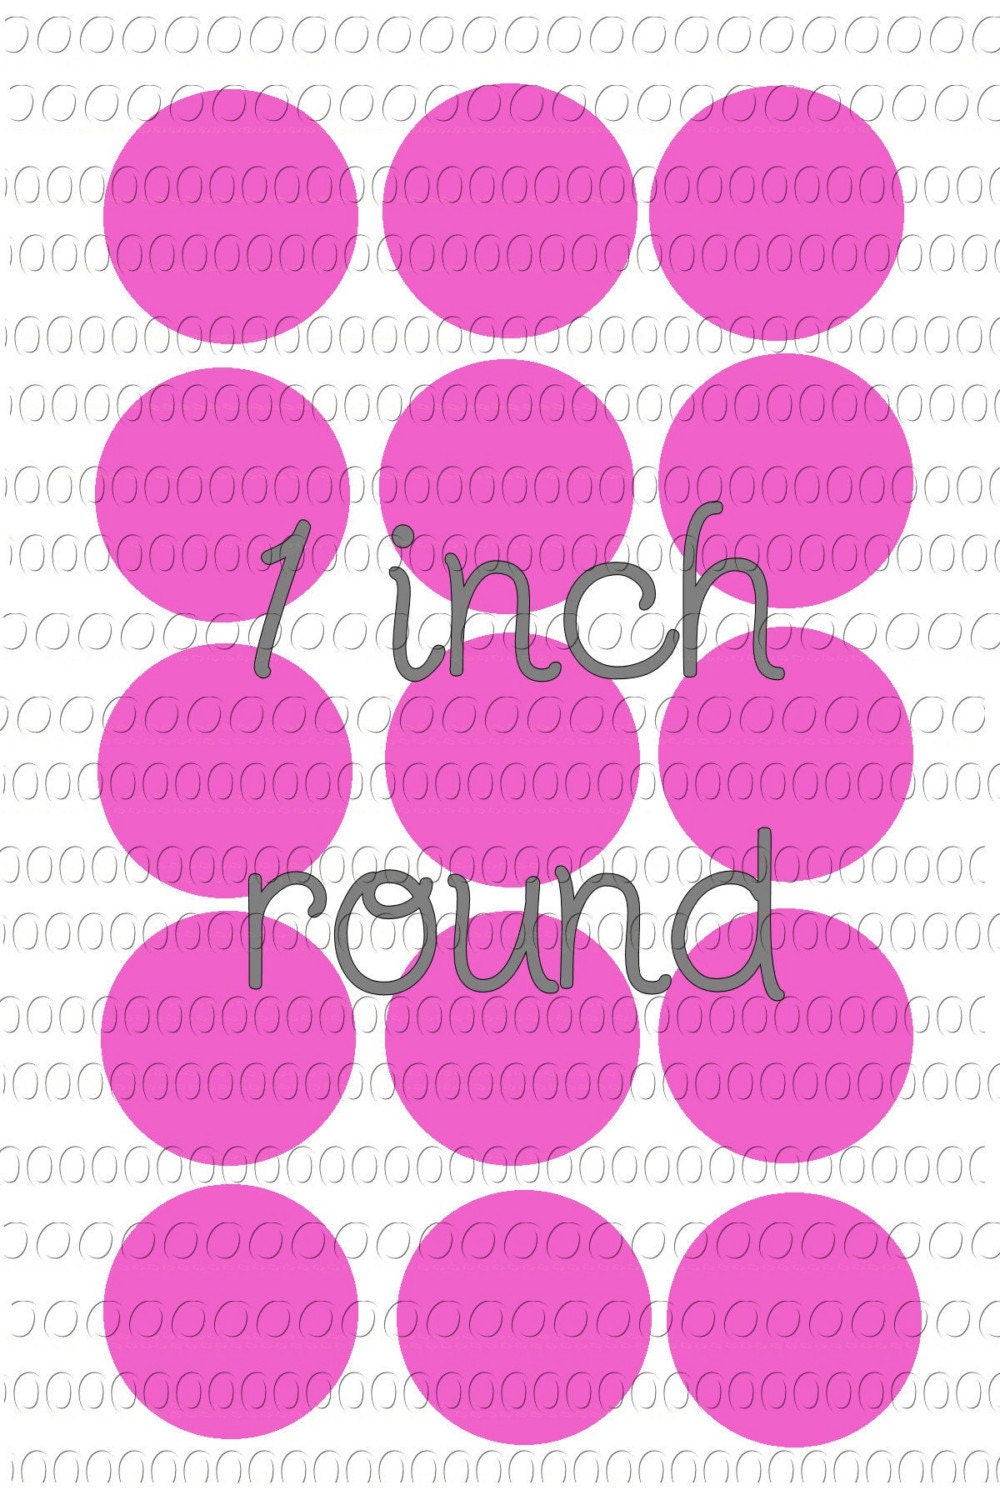 1-inch-round-bottle-cap-templates-make-your-own-by-craftgraphics